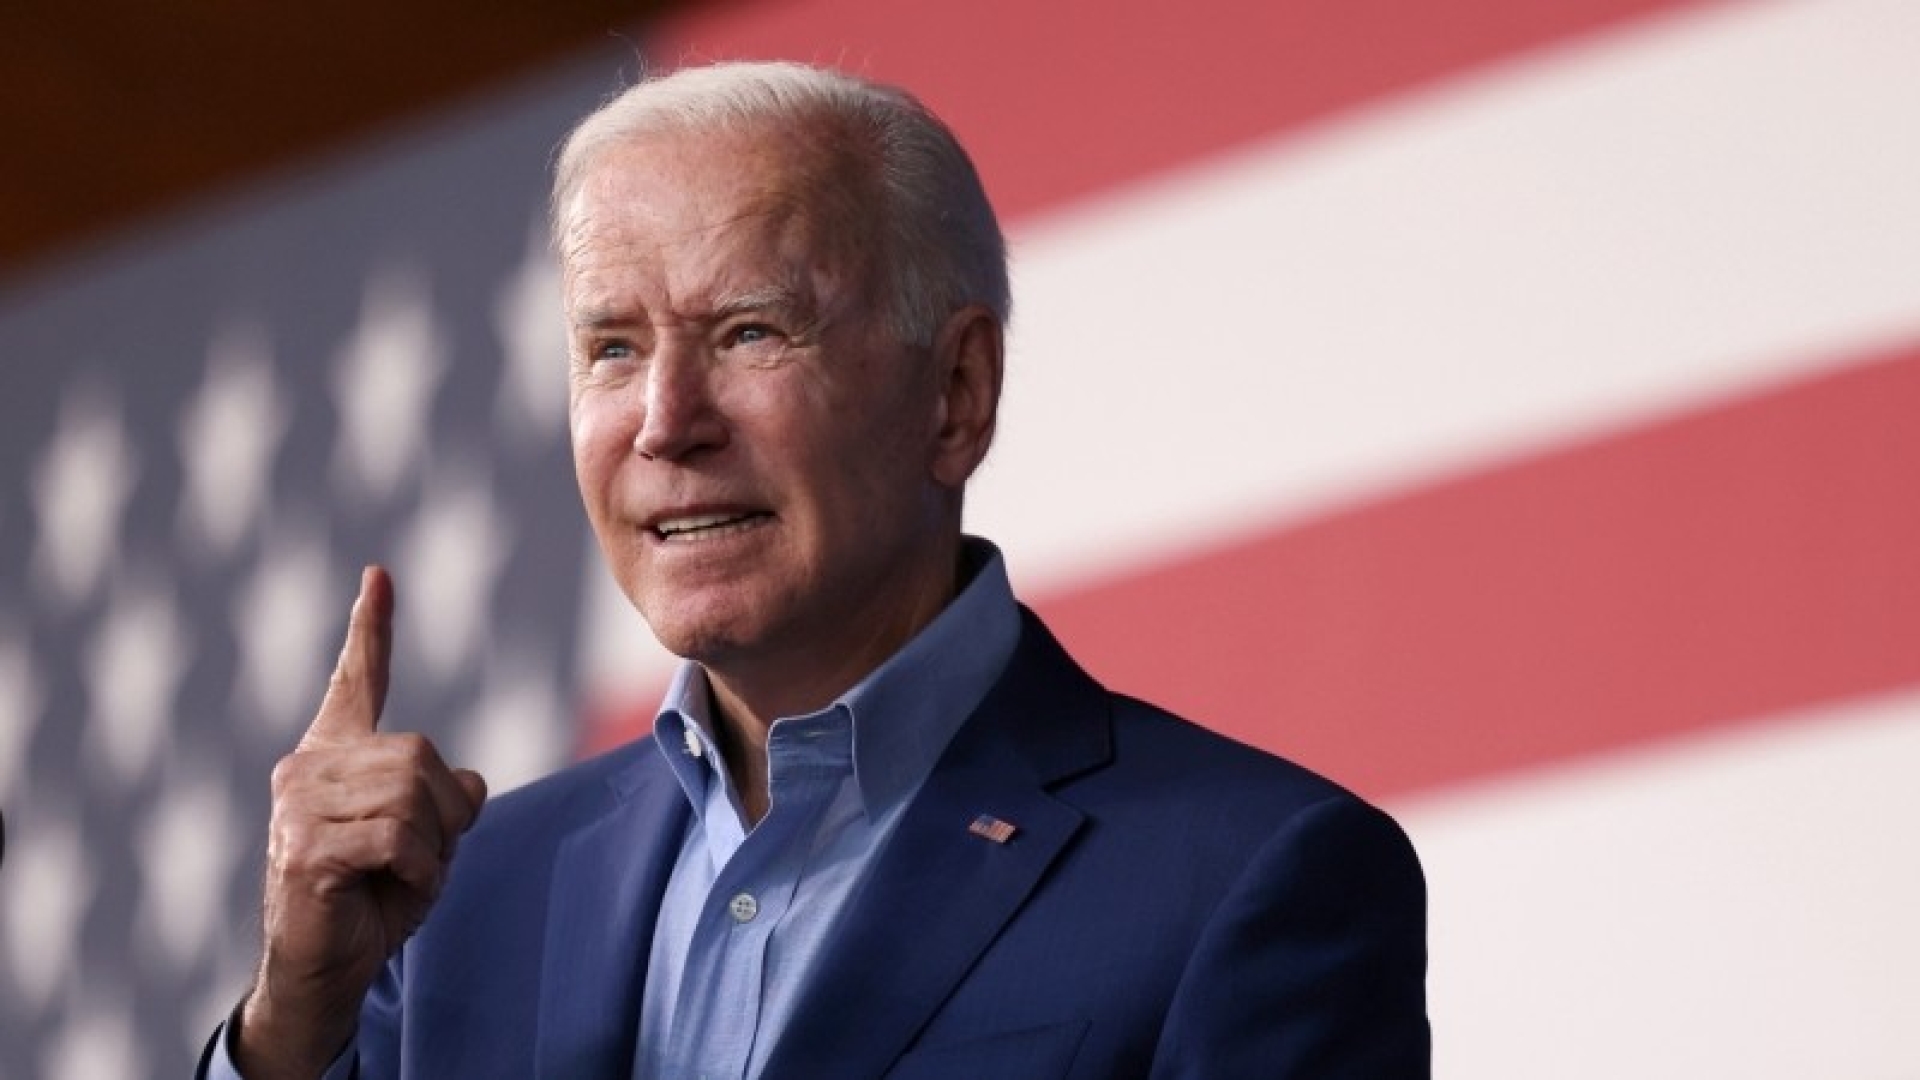 Dehumanization and dementia: what else does Biden have for Russia?